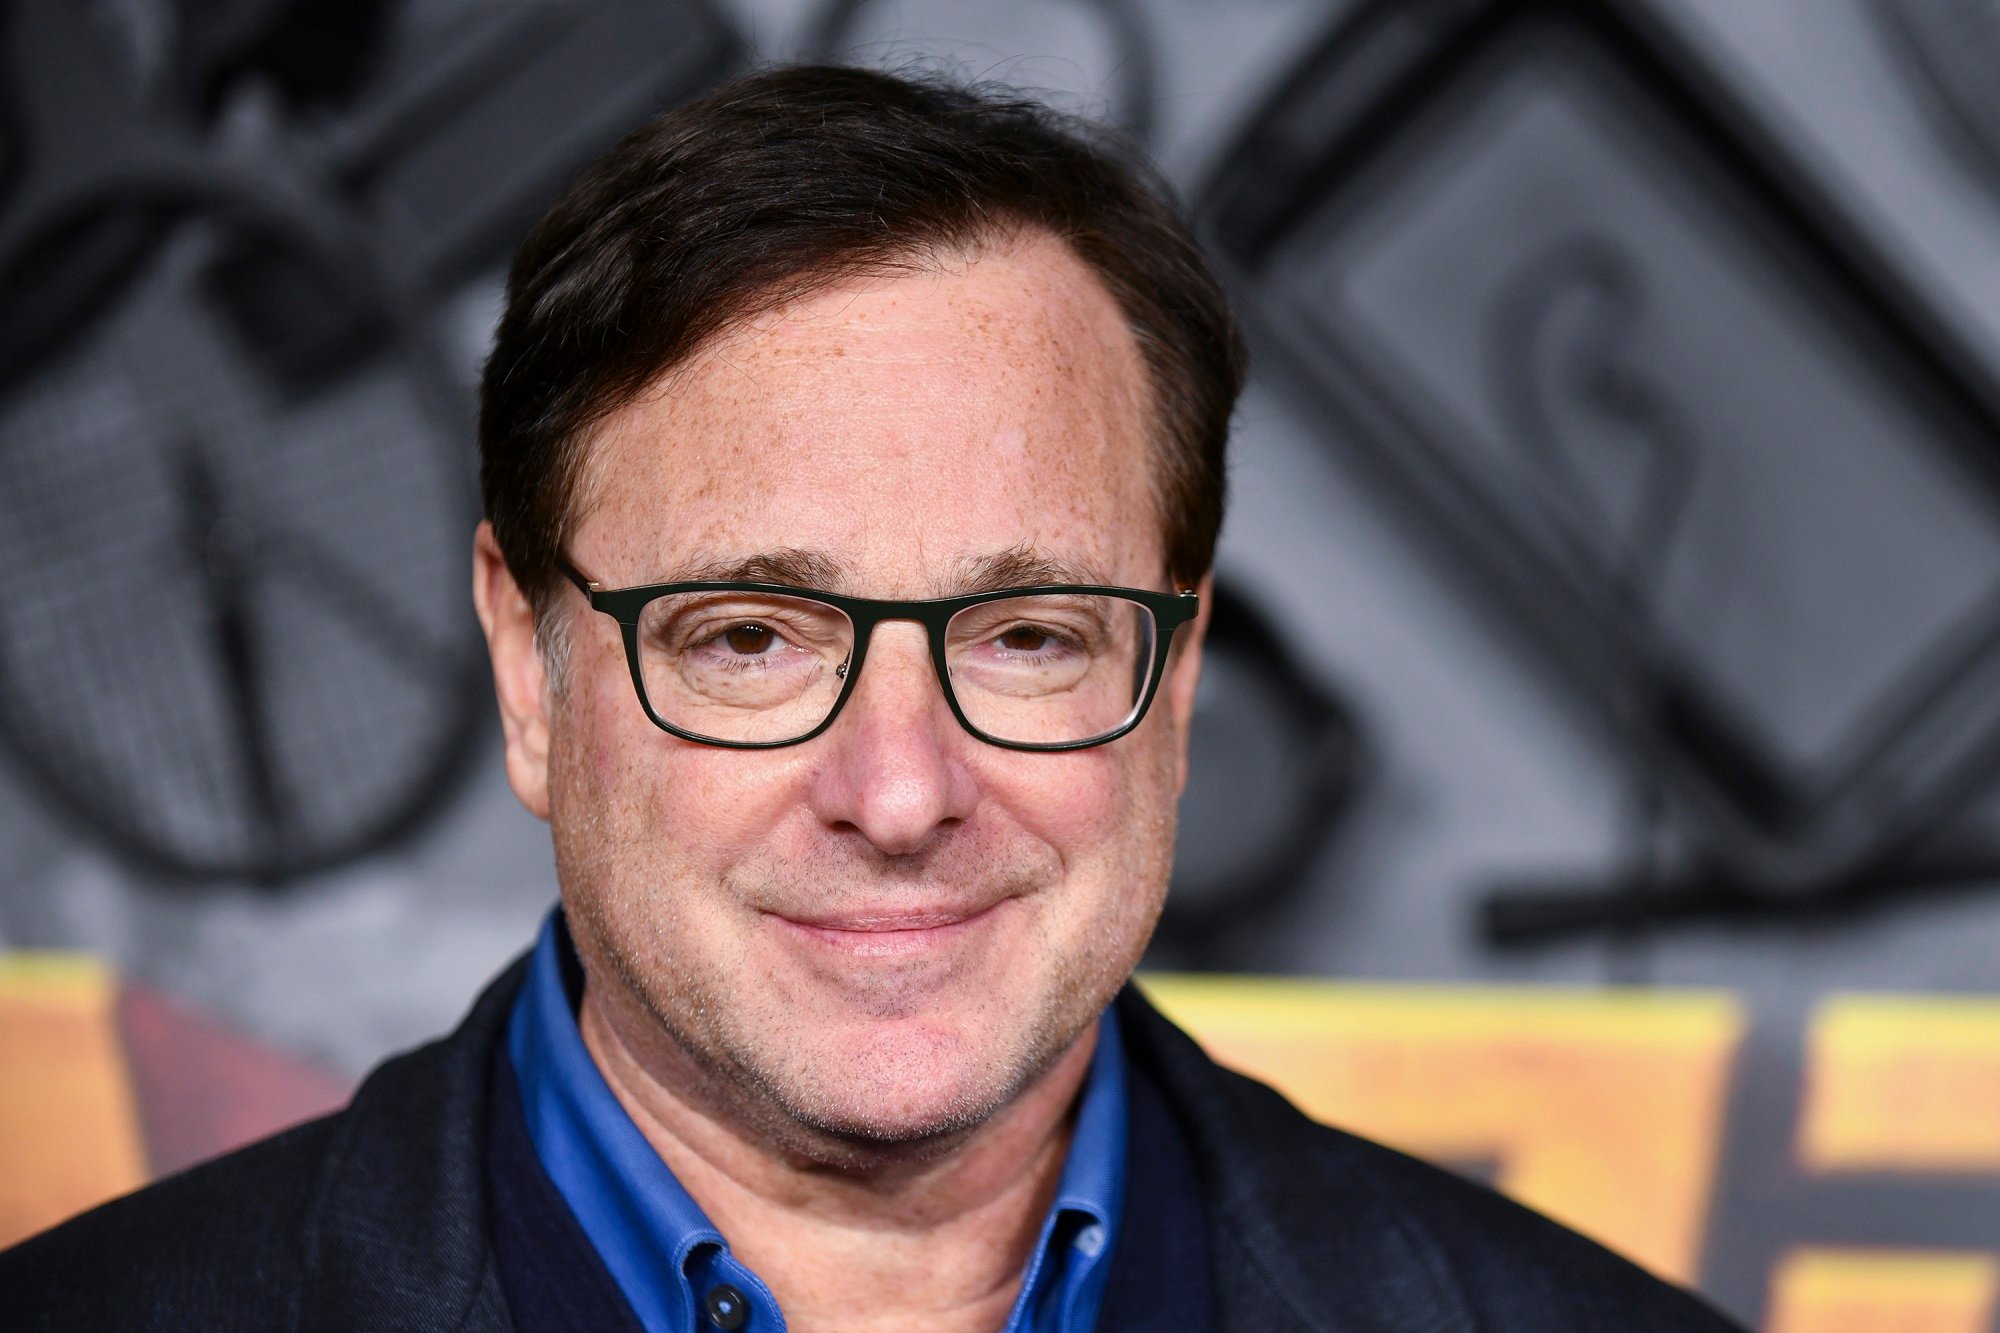 Regarding COVID-19, Bob Saget Tried to Remain ‘Positive’: ‘We All Have to Look Forward’